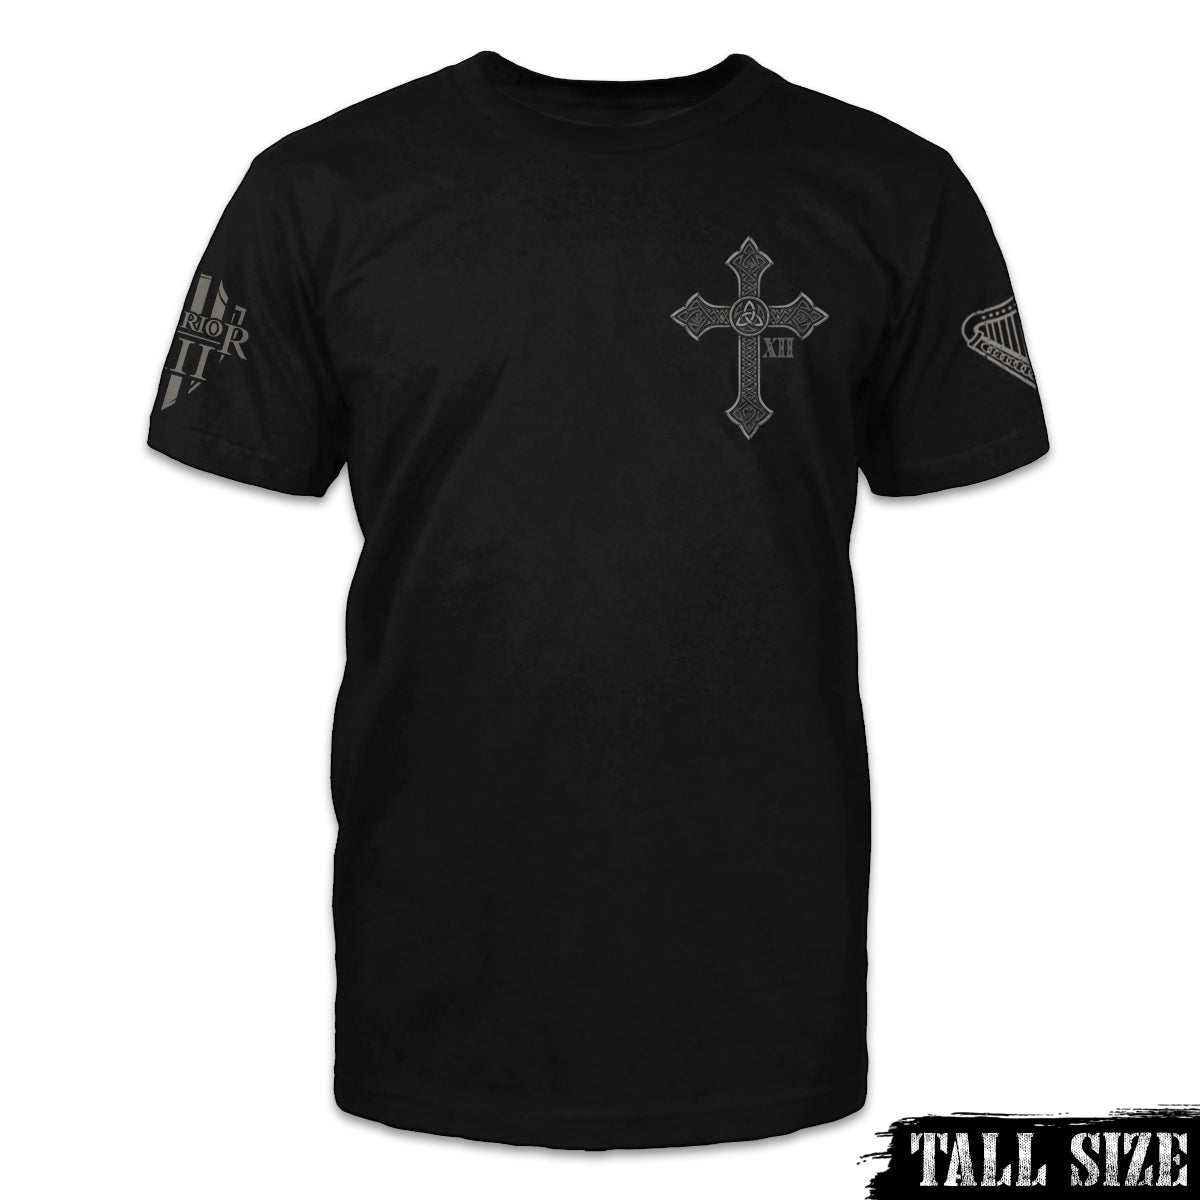 A black tall size shirt with an Irish cross printed on the front of the shirt.